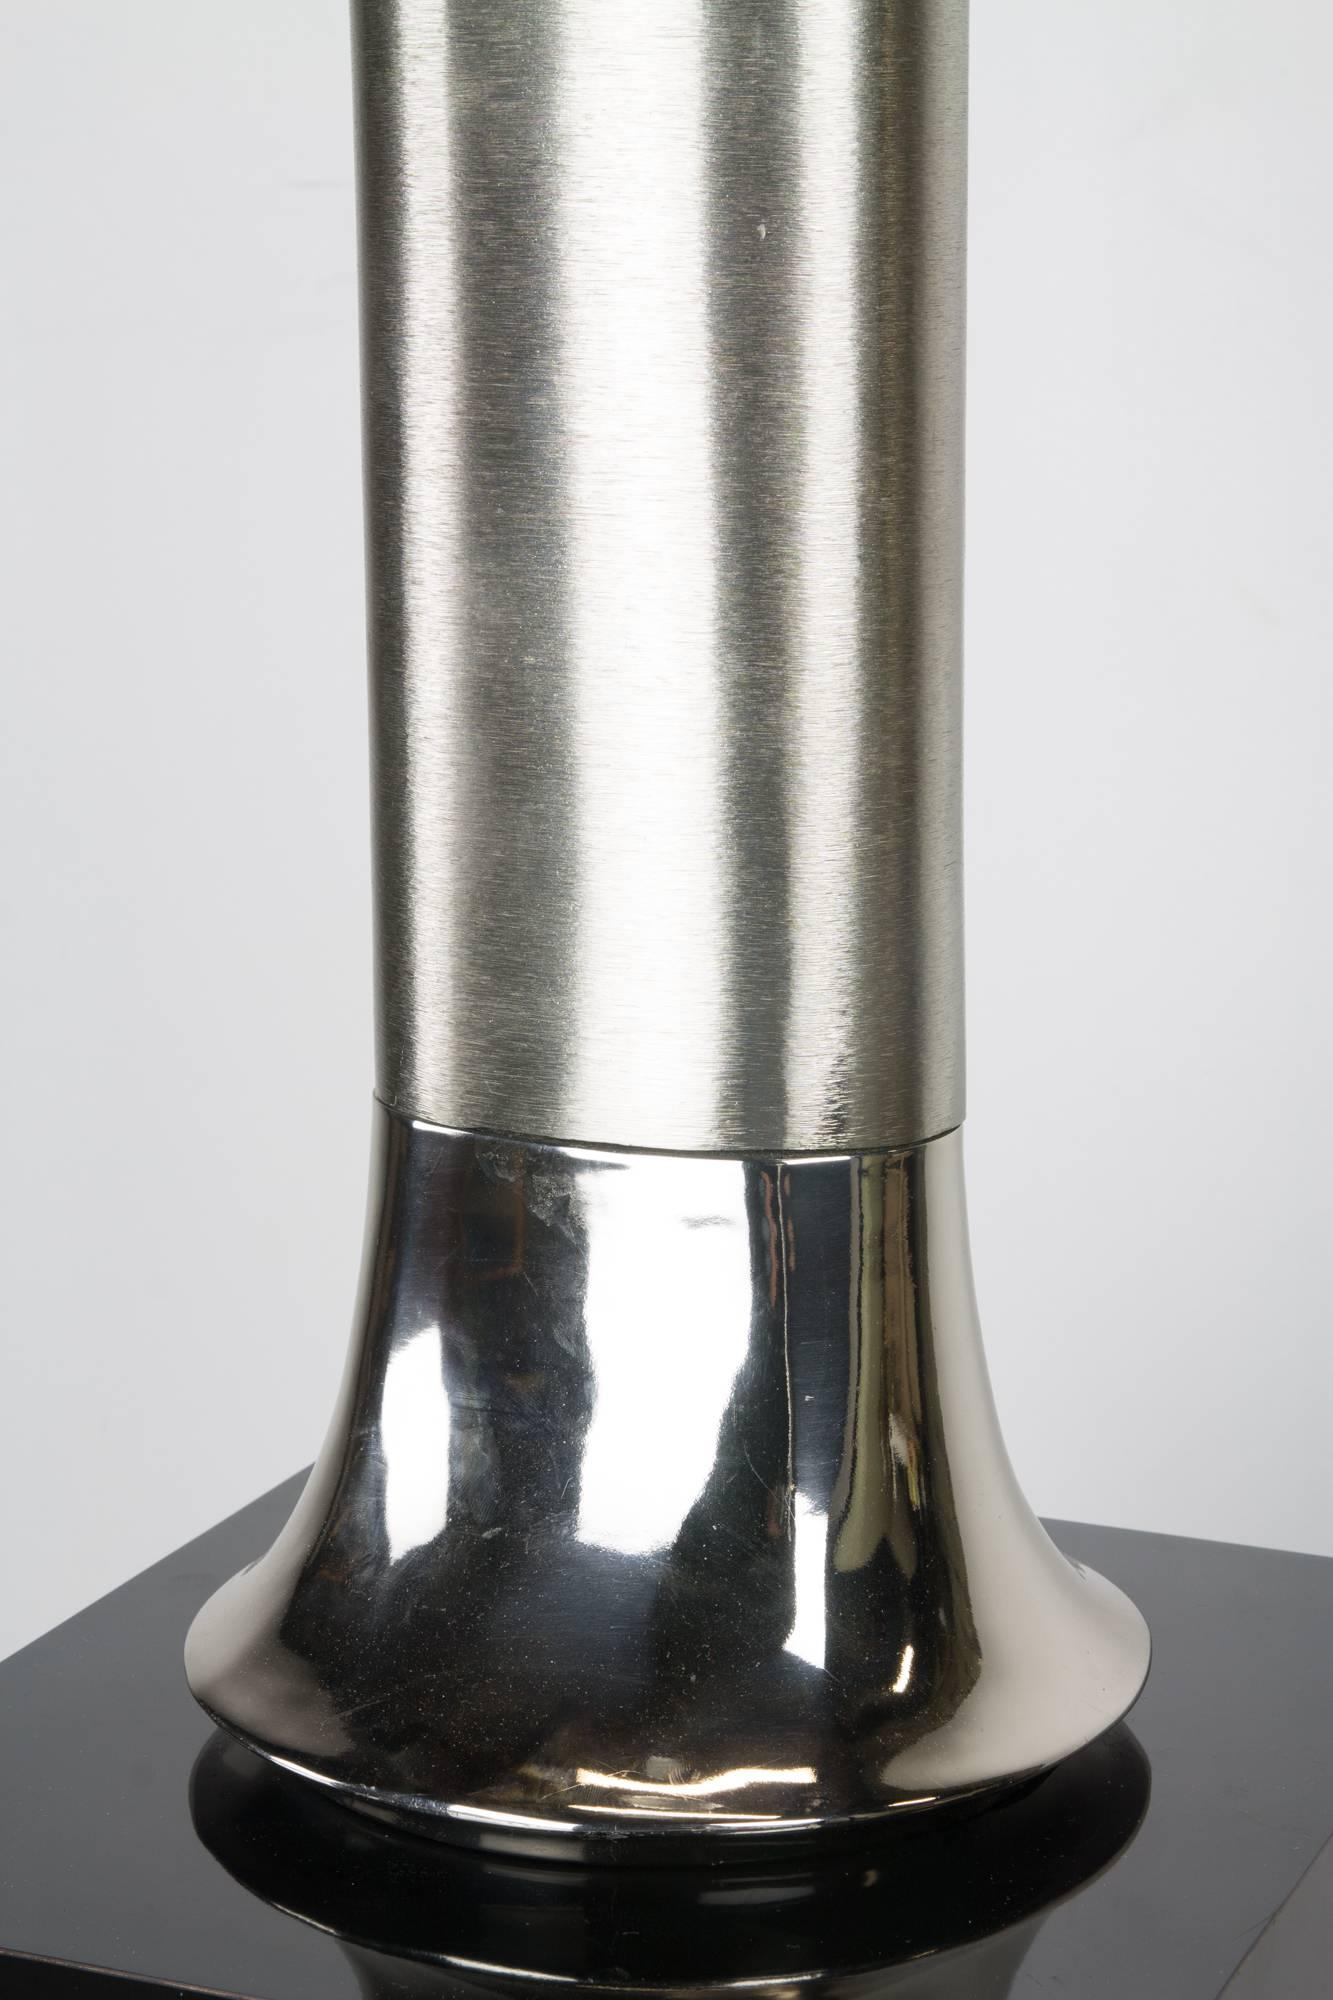 A rare table lamp by Laurel with a subtle tulip form at the chrome base, rising into a body of brushed aluminium.